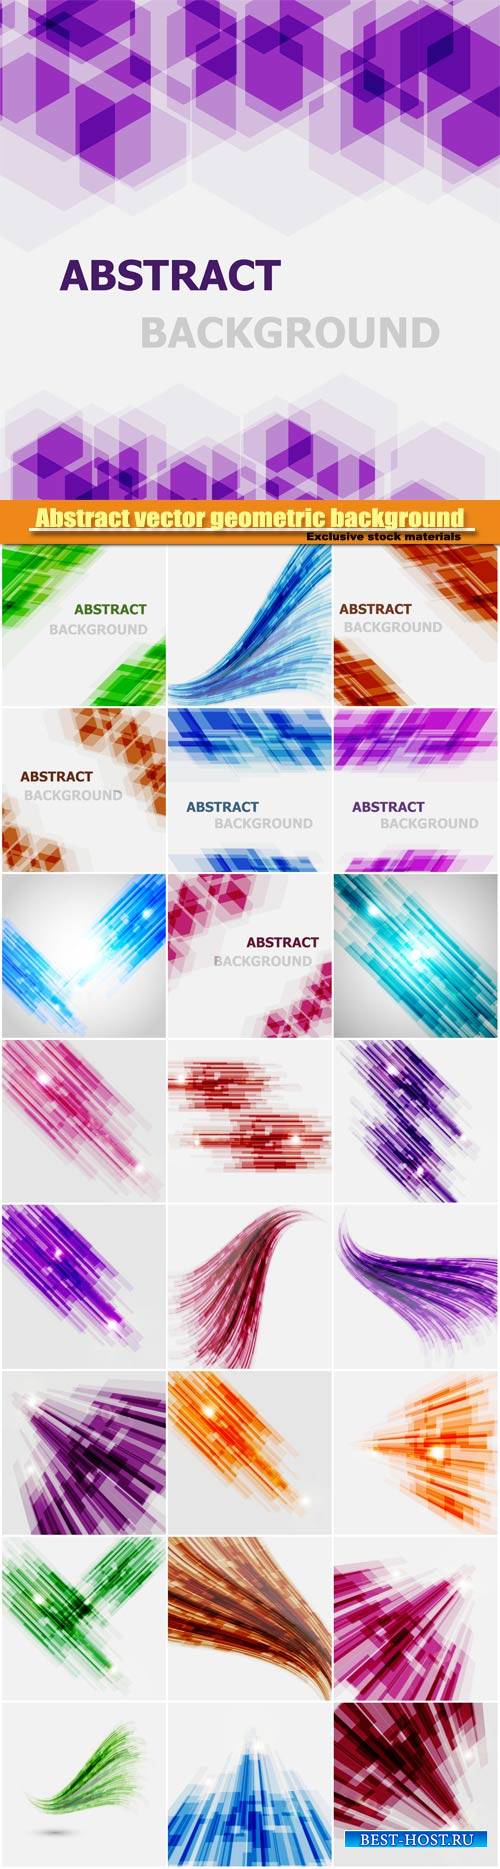 Abstract vector geometric background,  wave element design